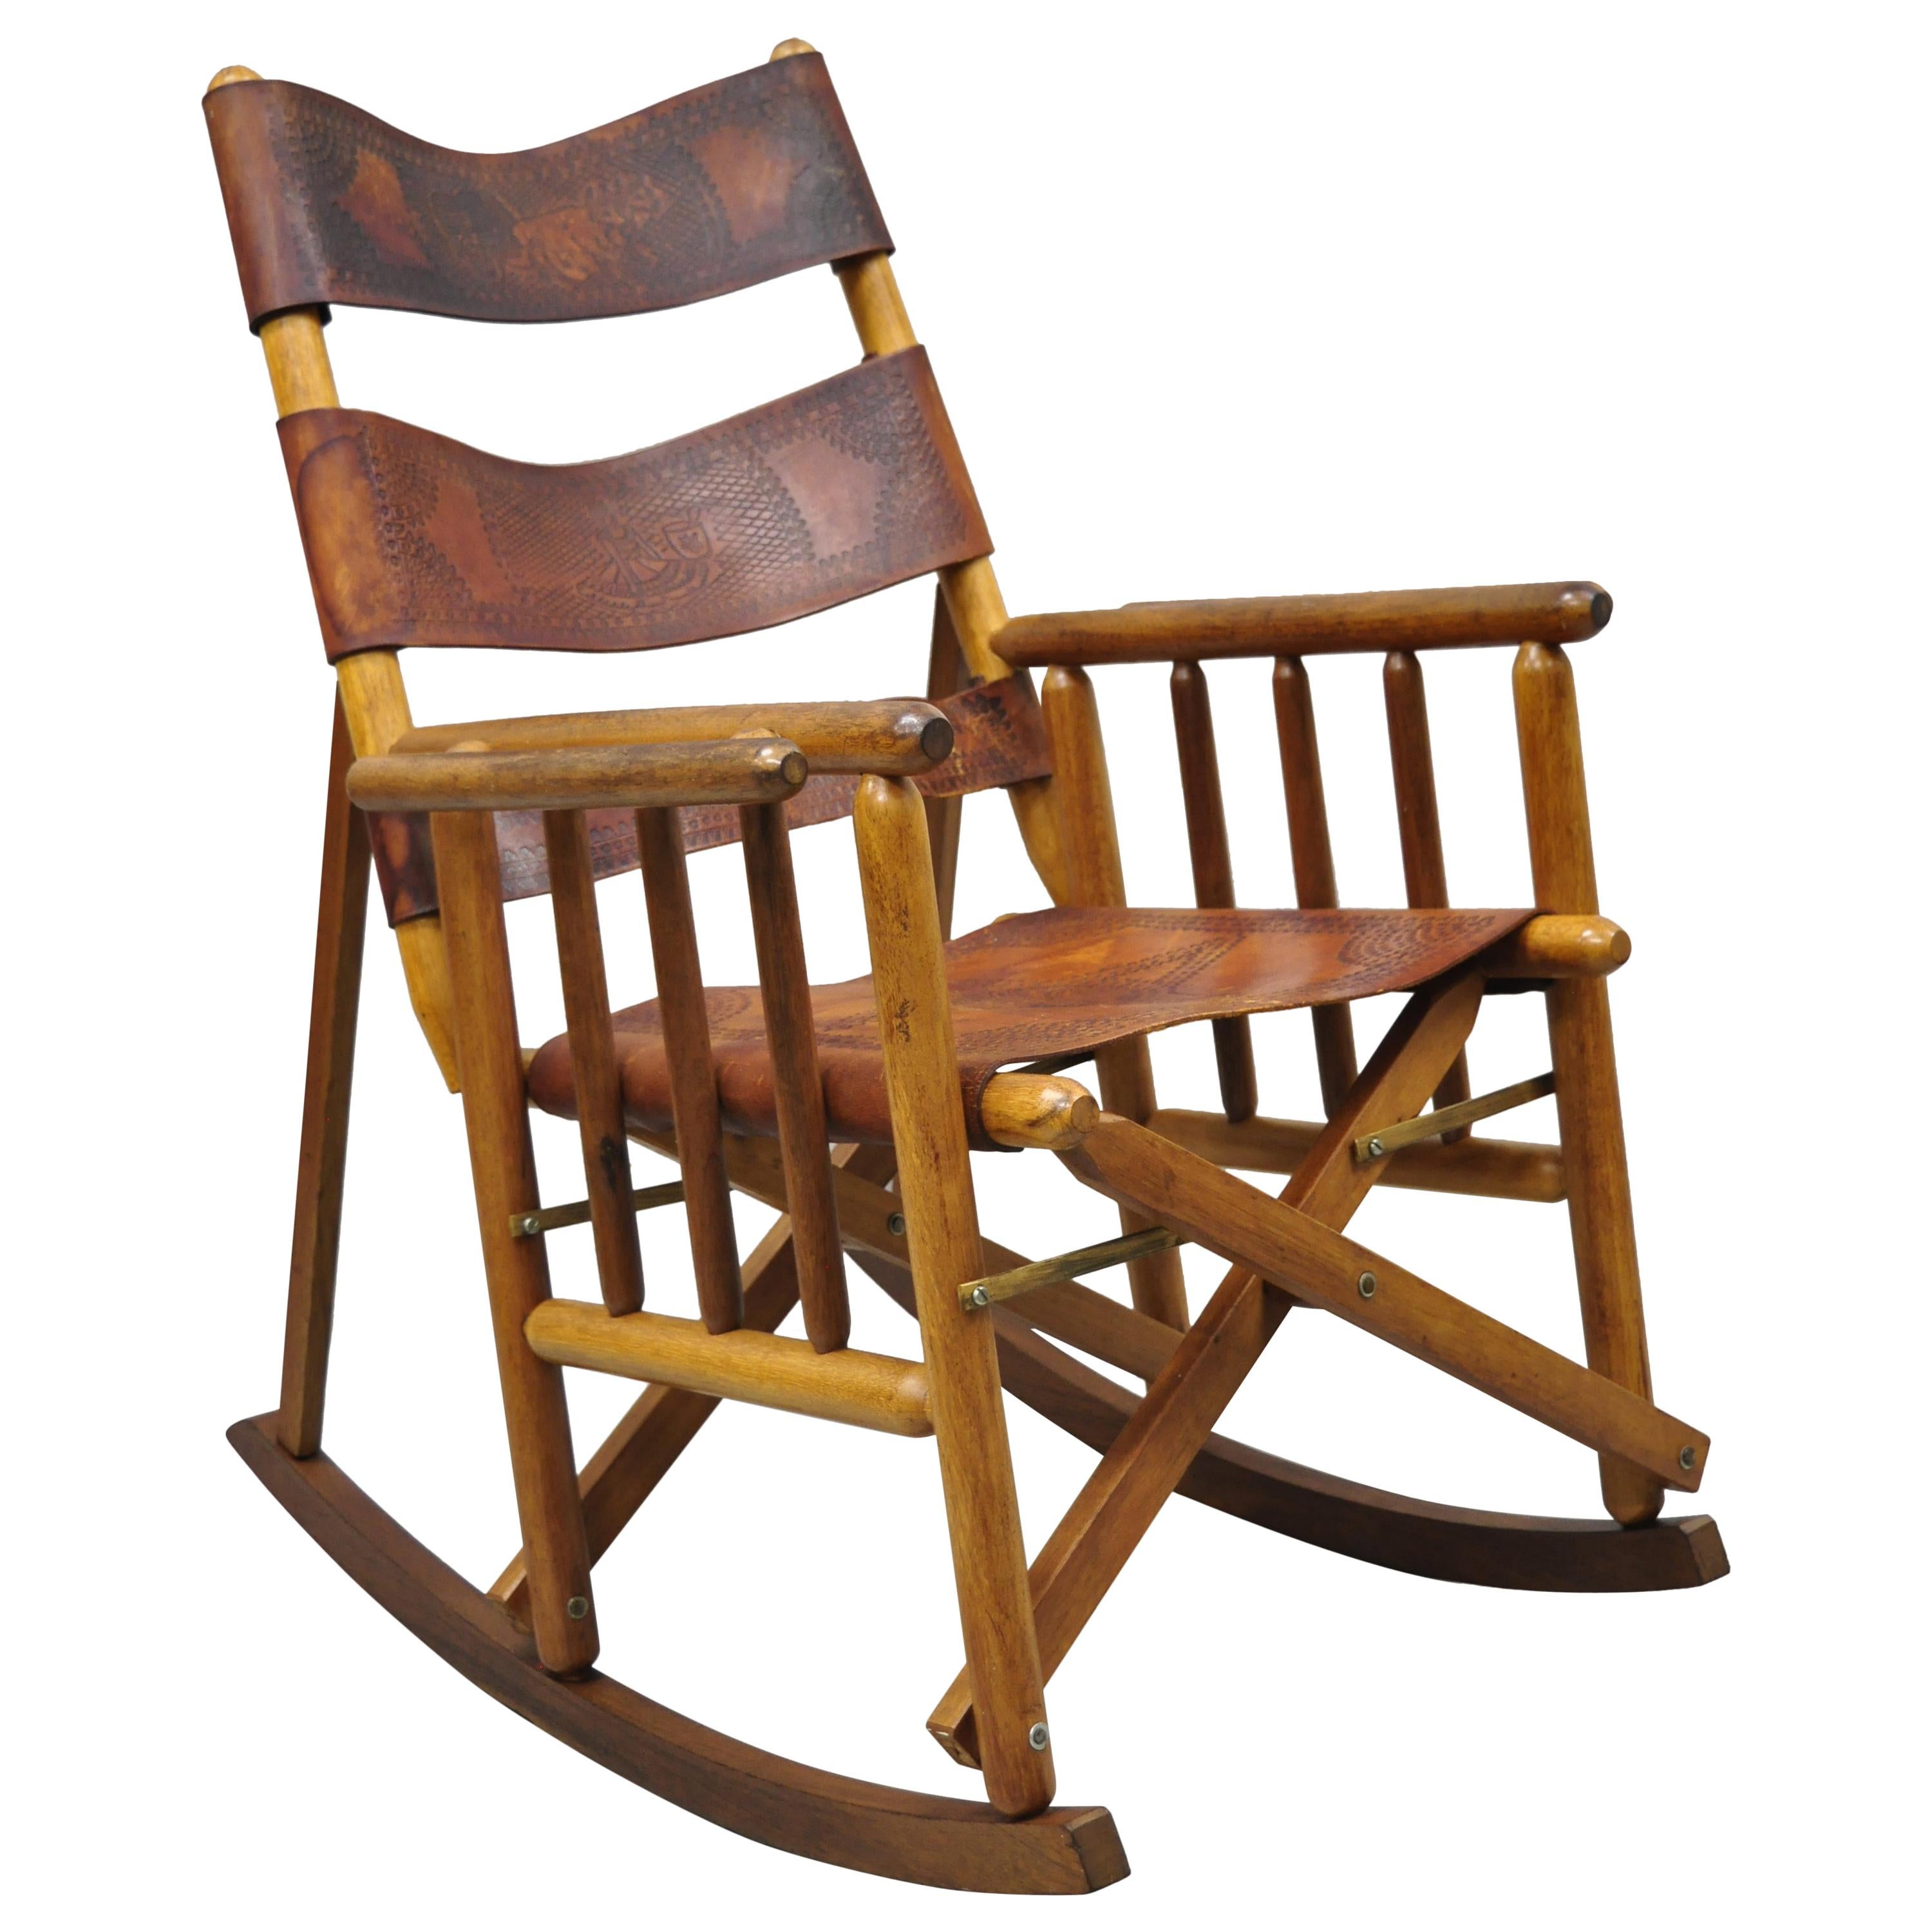 Vintage Brown Leather Campaign Style COSTA Rican Folding Rocking Chair Rocker